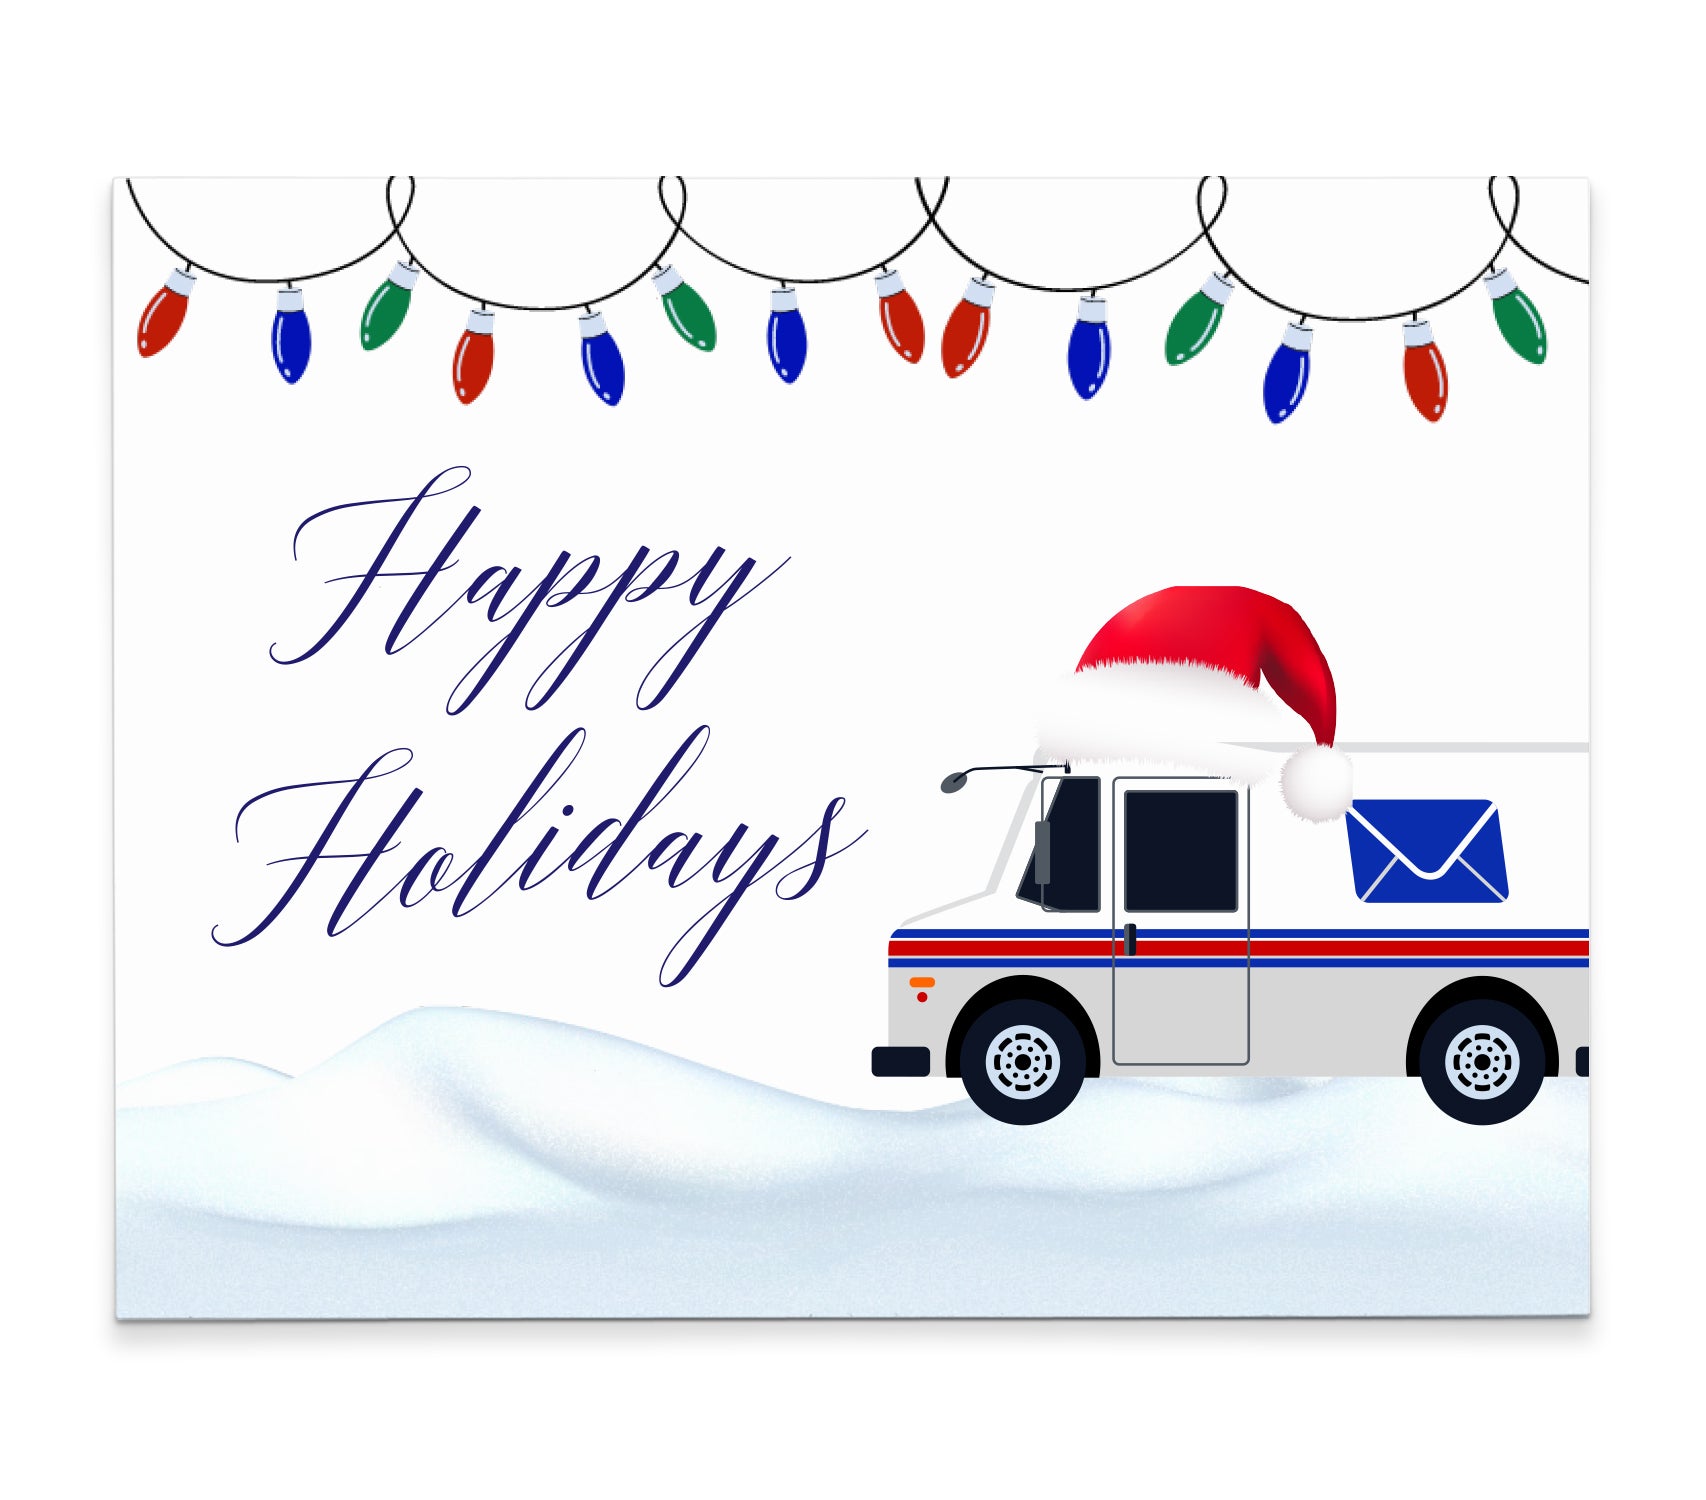     HGC012 Holiday Mail Carrier Postcards with Postal Truck christmas lights usps thank you santa hat